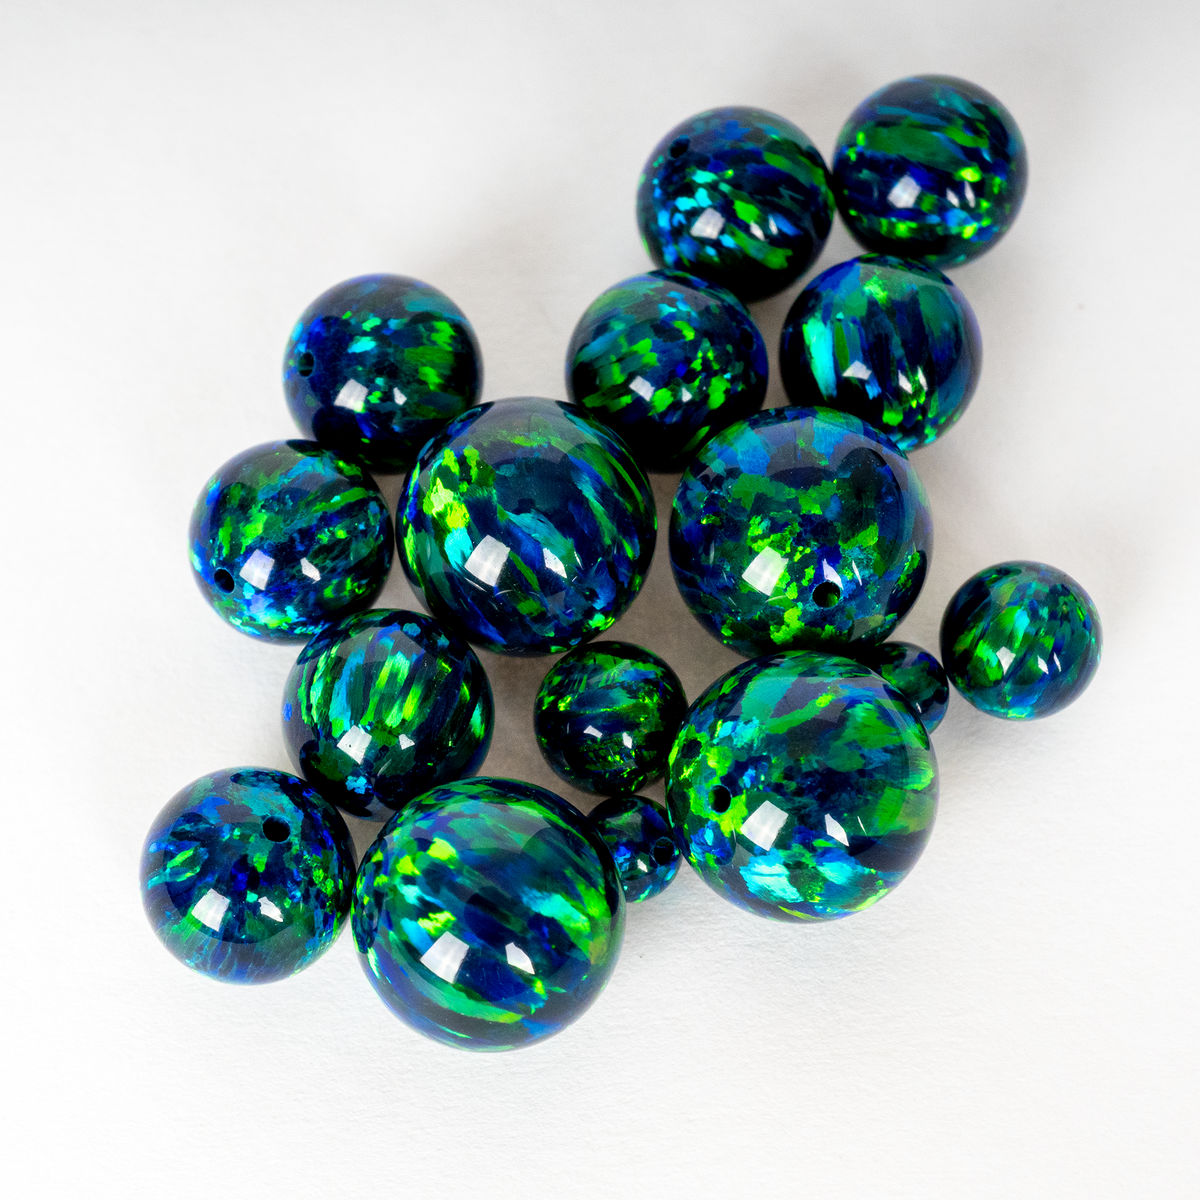 Green Black Opal Smooth Rondelle Beads Green Black Opal Beads, Green Black  Opal Plain Beads, Jewelry Making, Opal Beads, Opal Rondelle Beads 